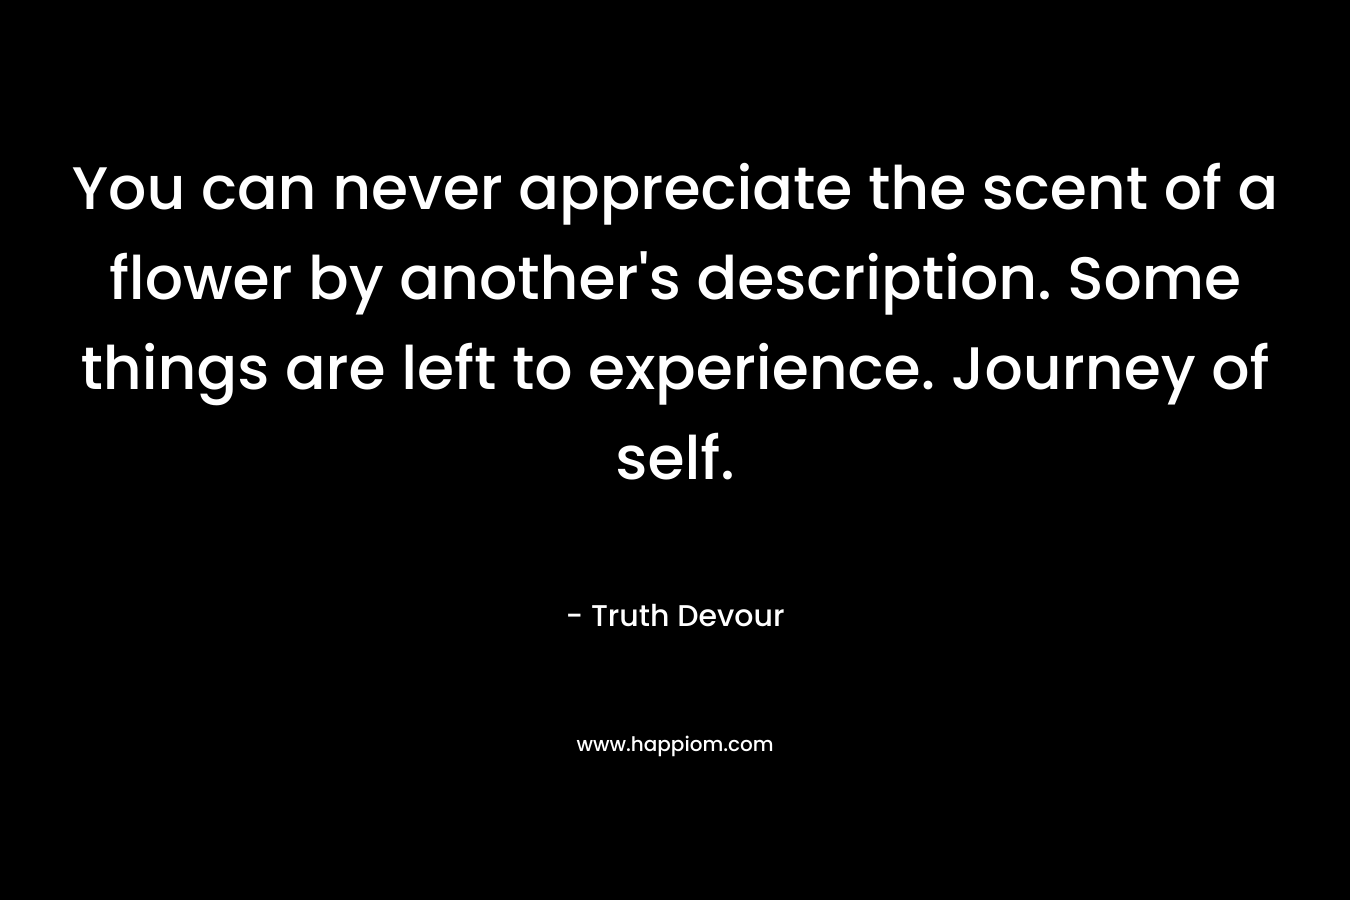 You can never appreciate the scent of a flower by another’s description. Some things are left to experience. Journey of self. – Truth Devour